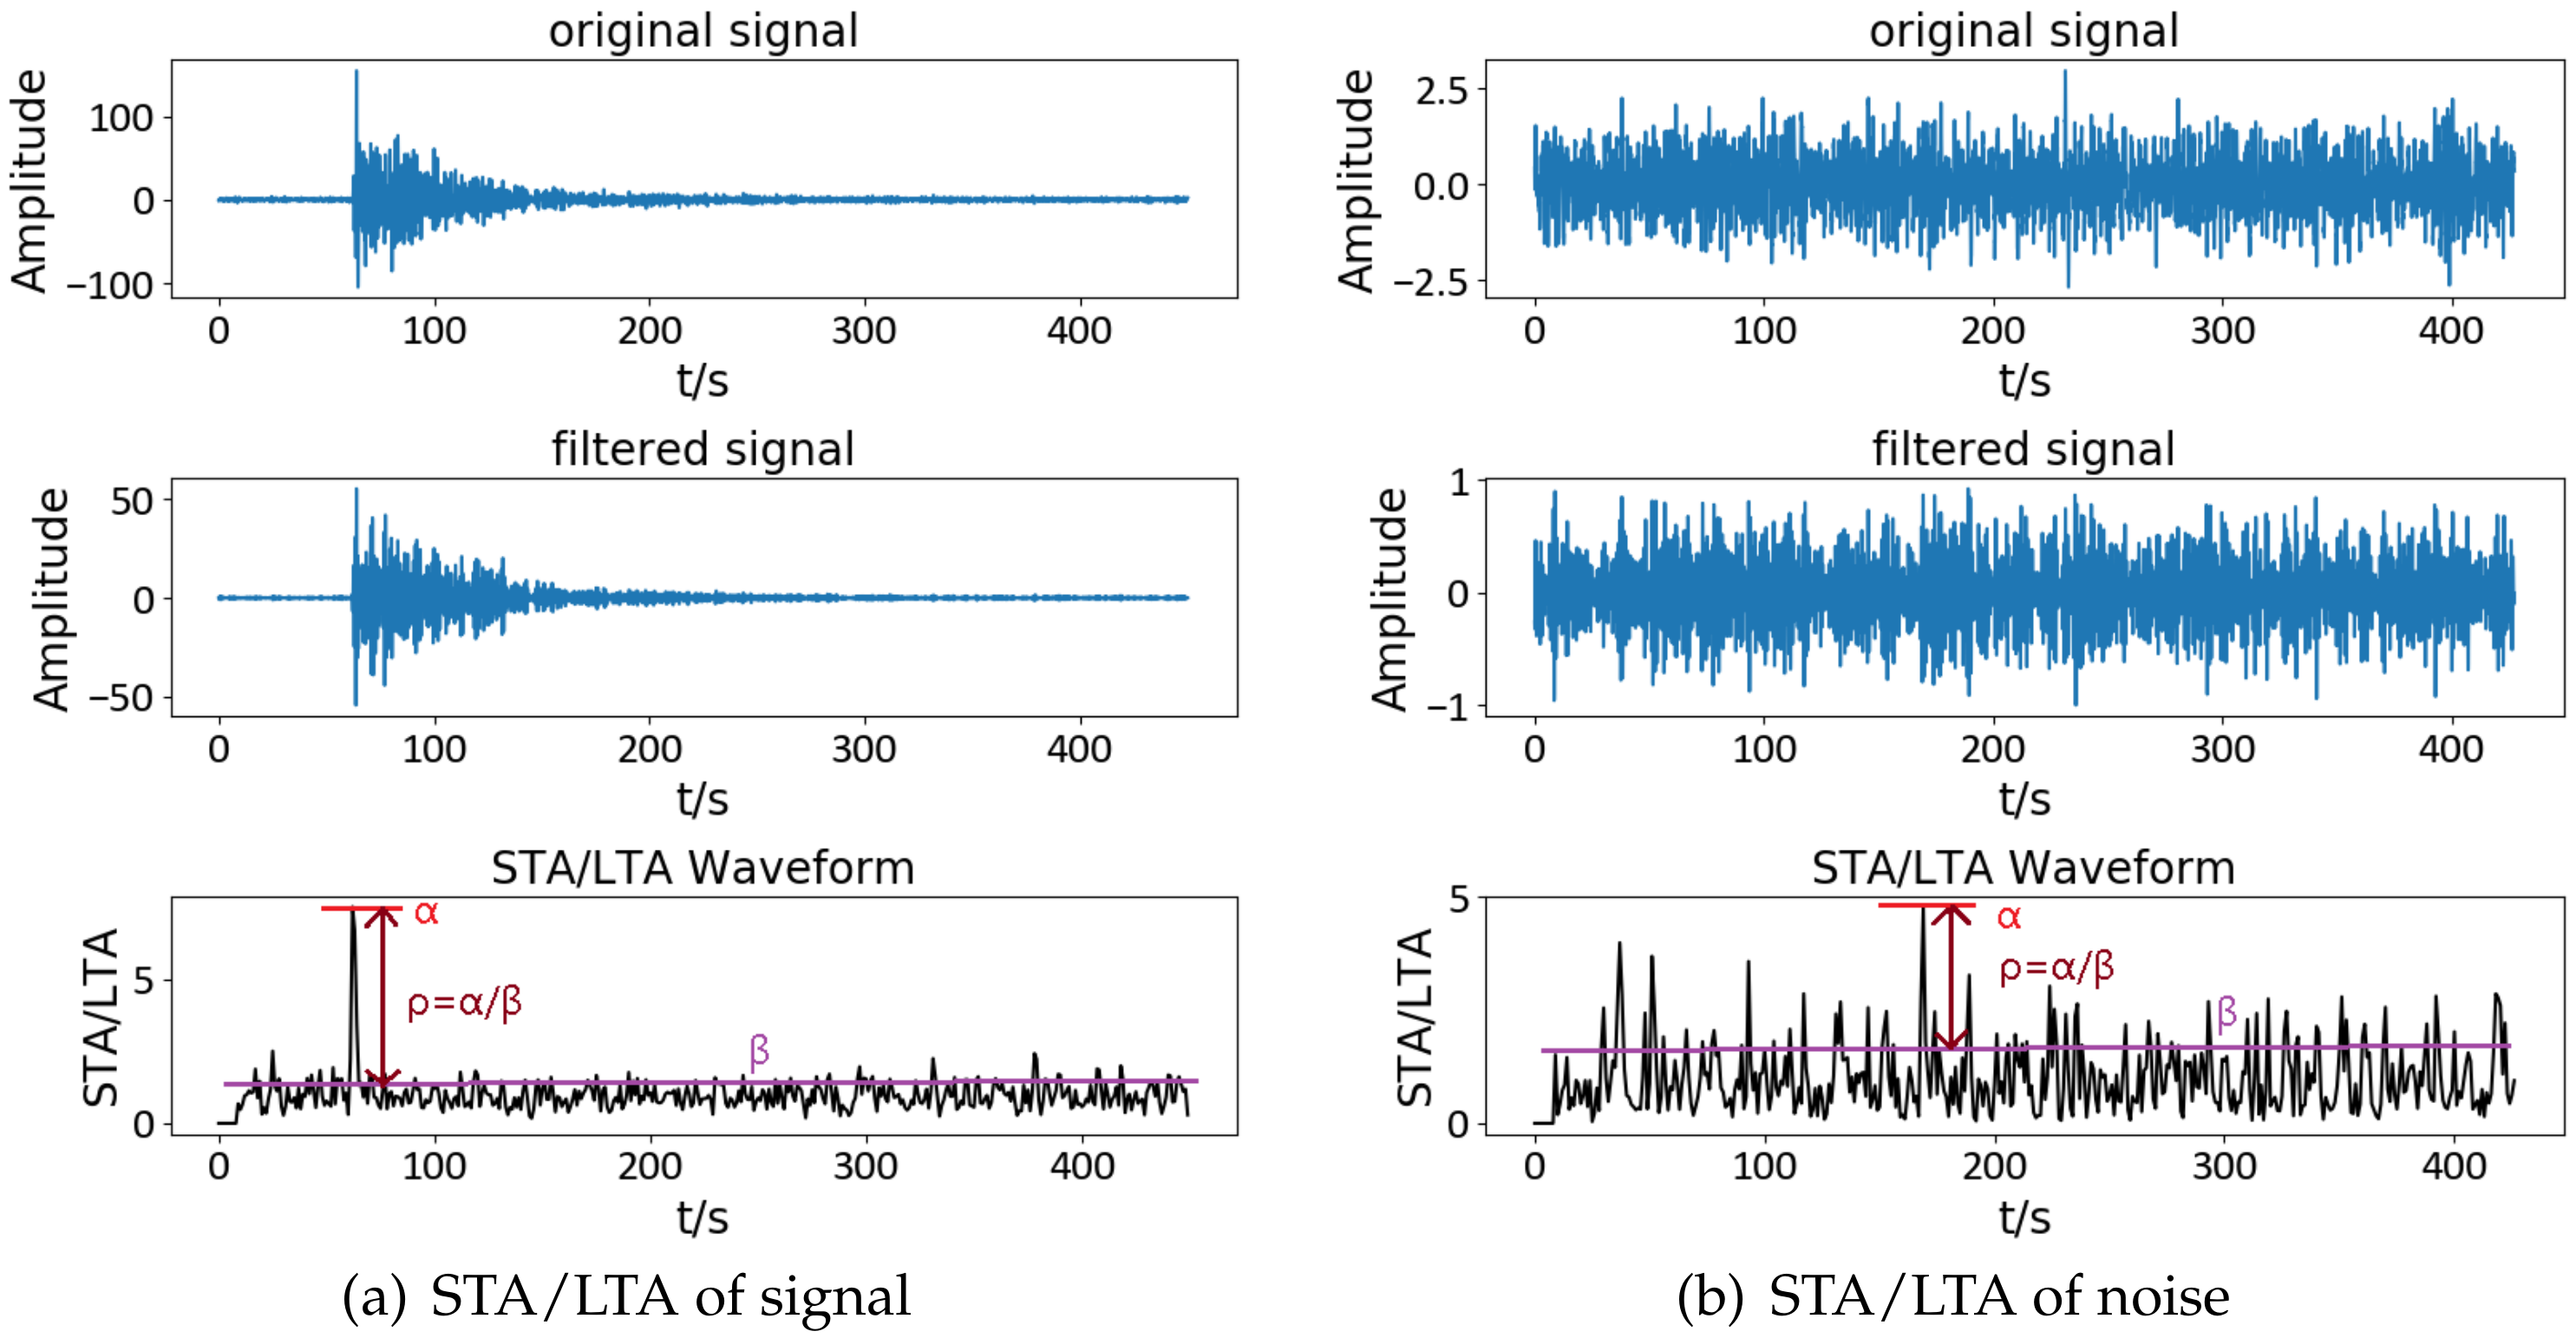 Fiber-Optic Networks Can Be Used as Seismic Arrays - Eos